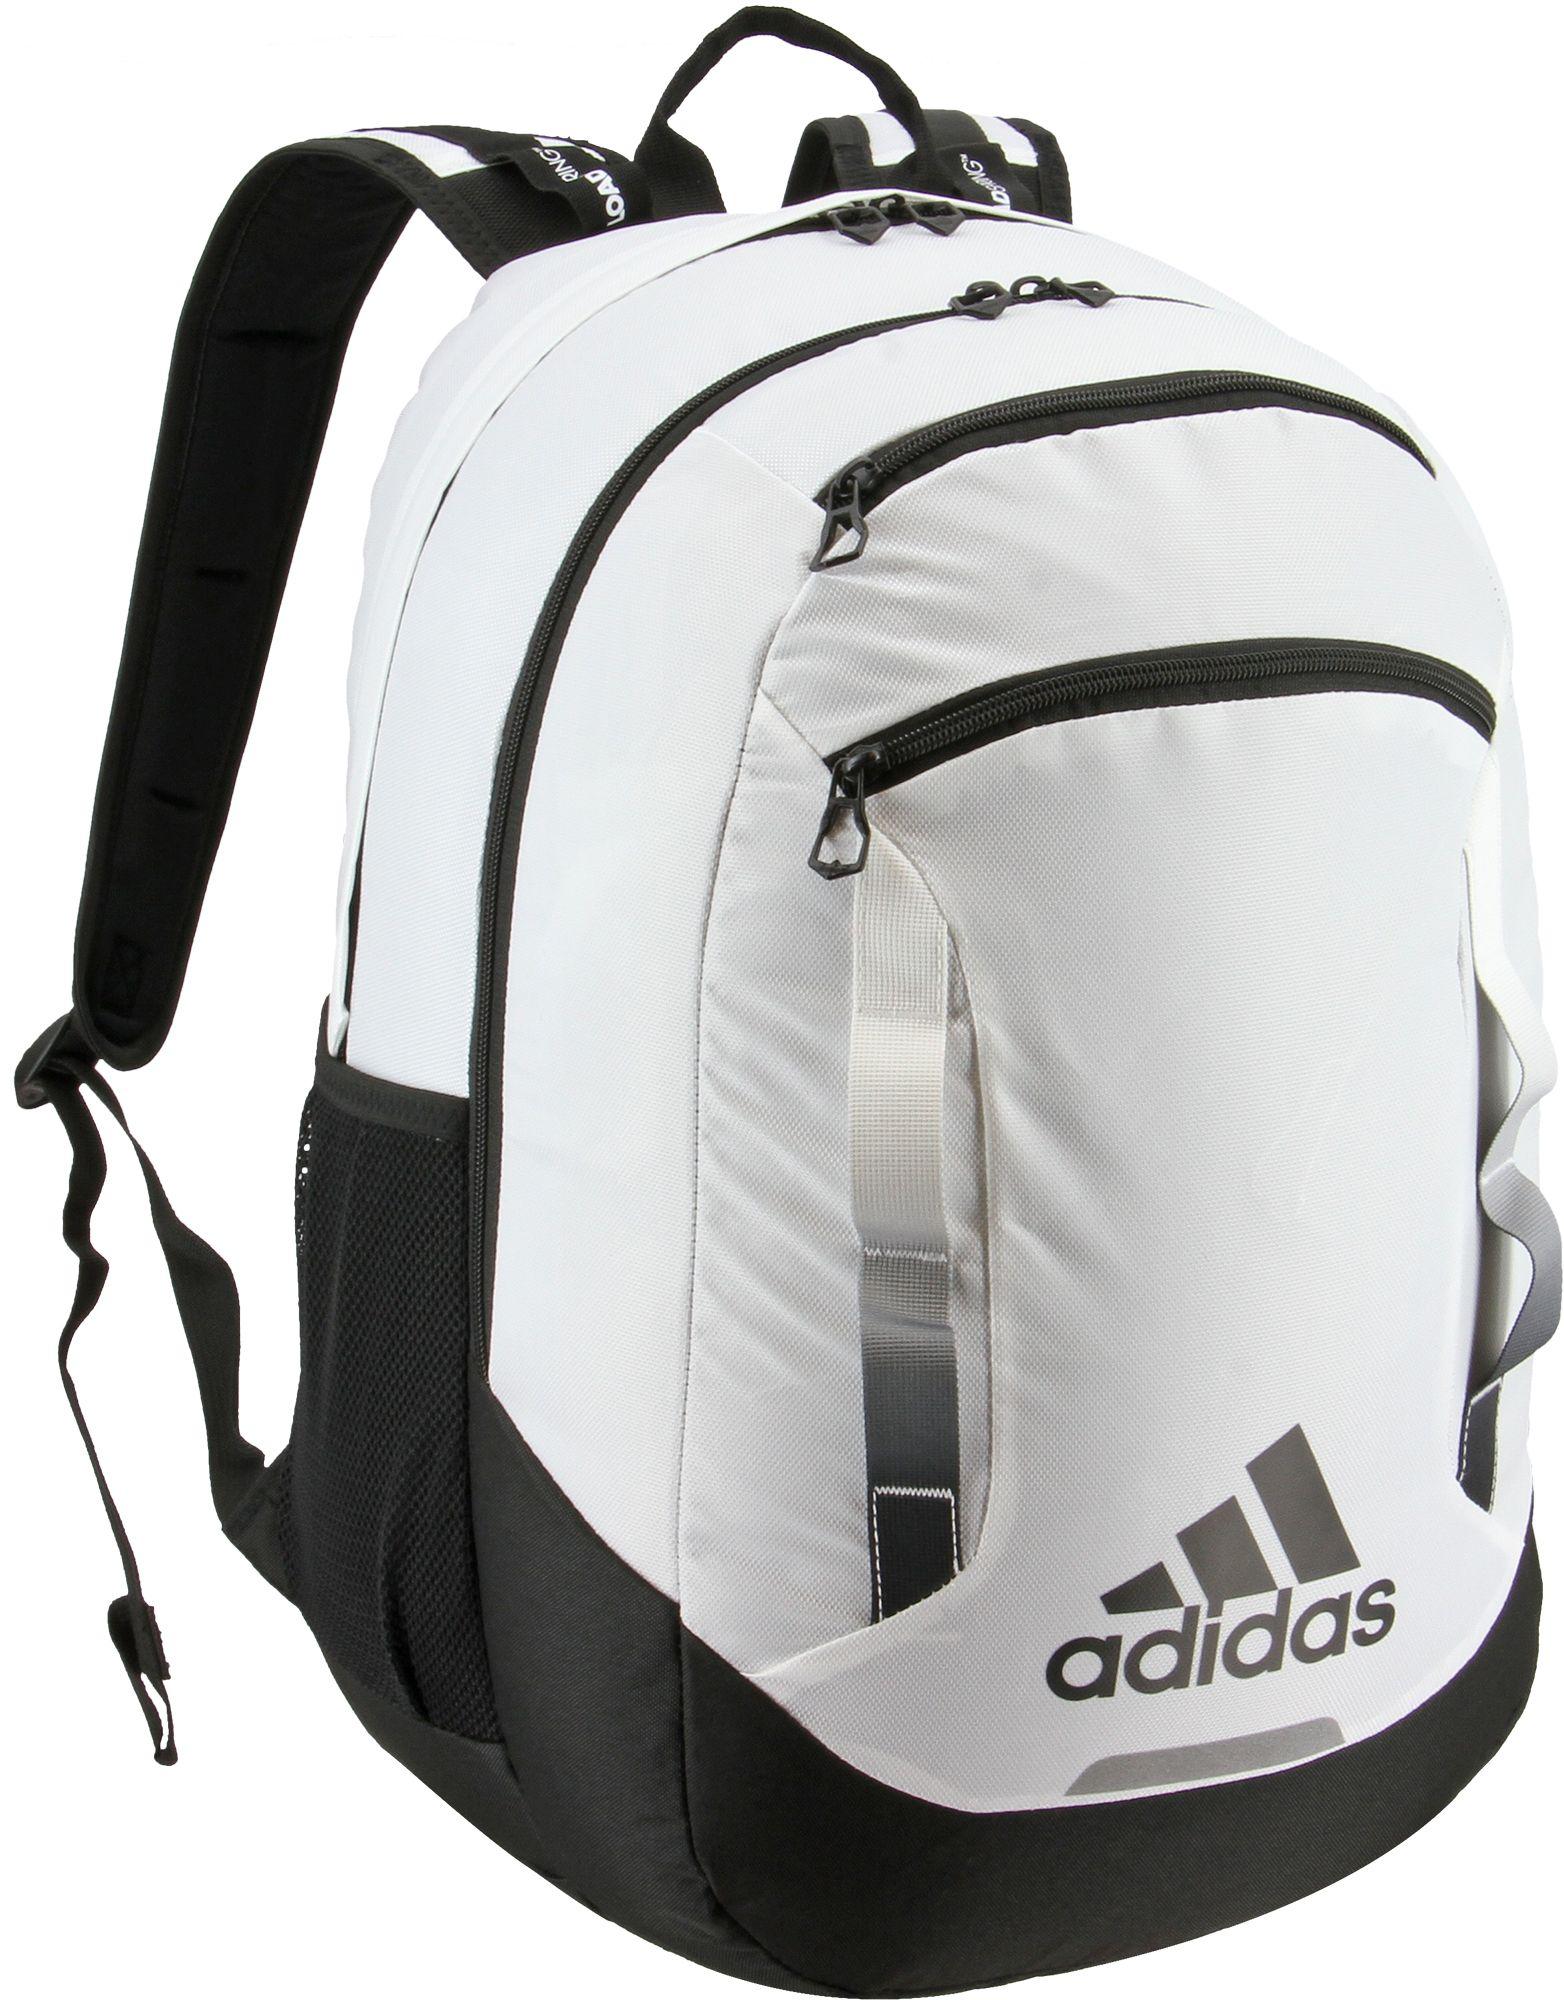 adidas Synthetic Rival Backpack in 